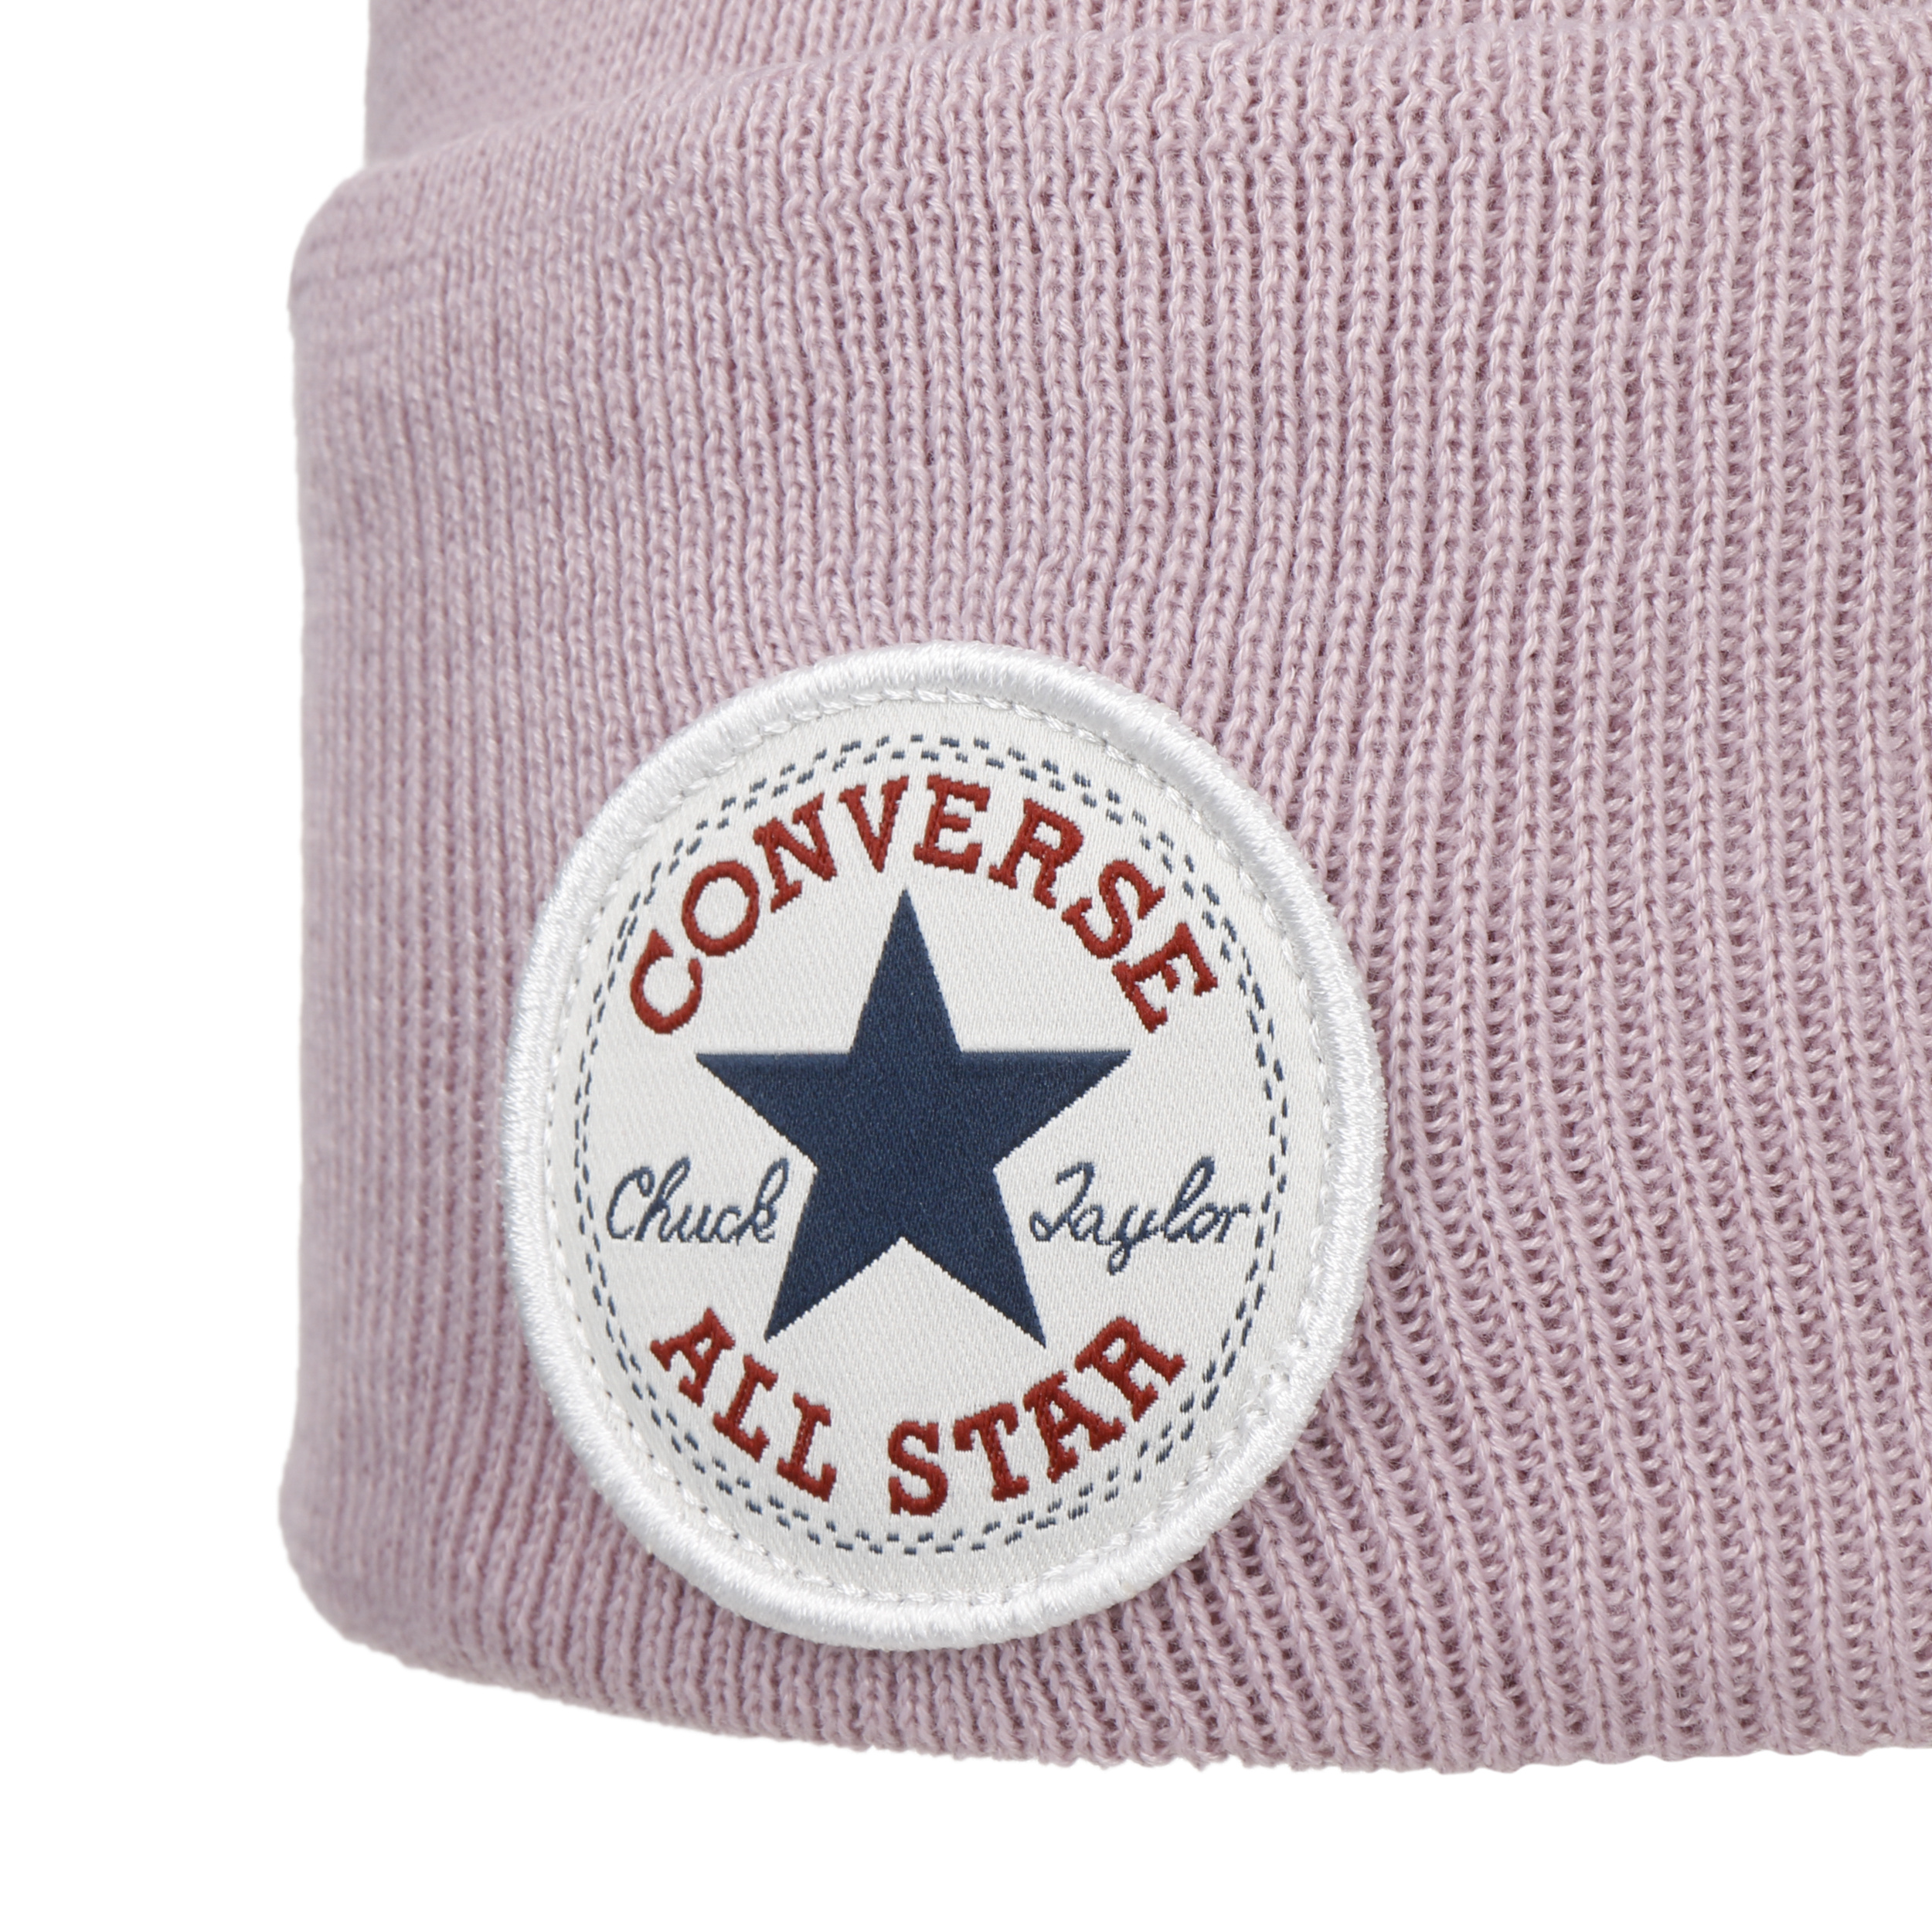 Hat 32,95 Patch Beanie Chuck € Converse - by